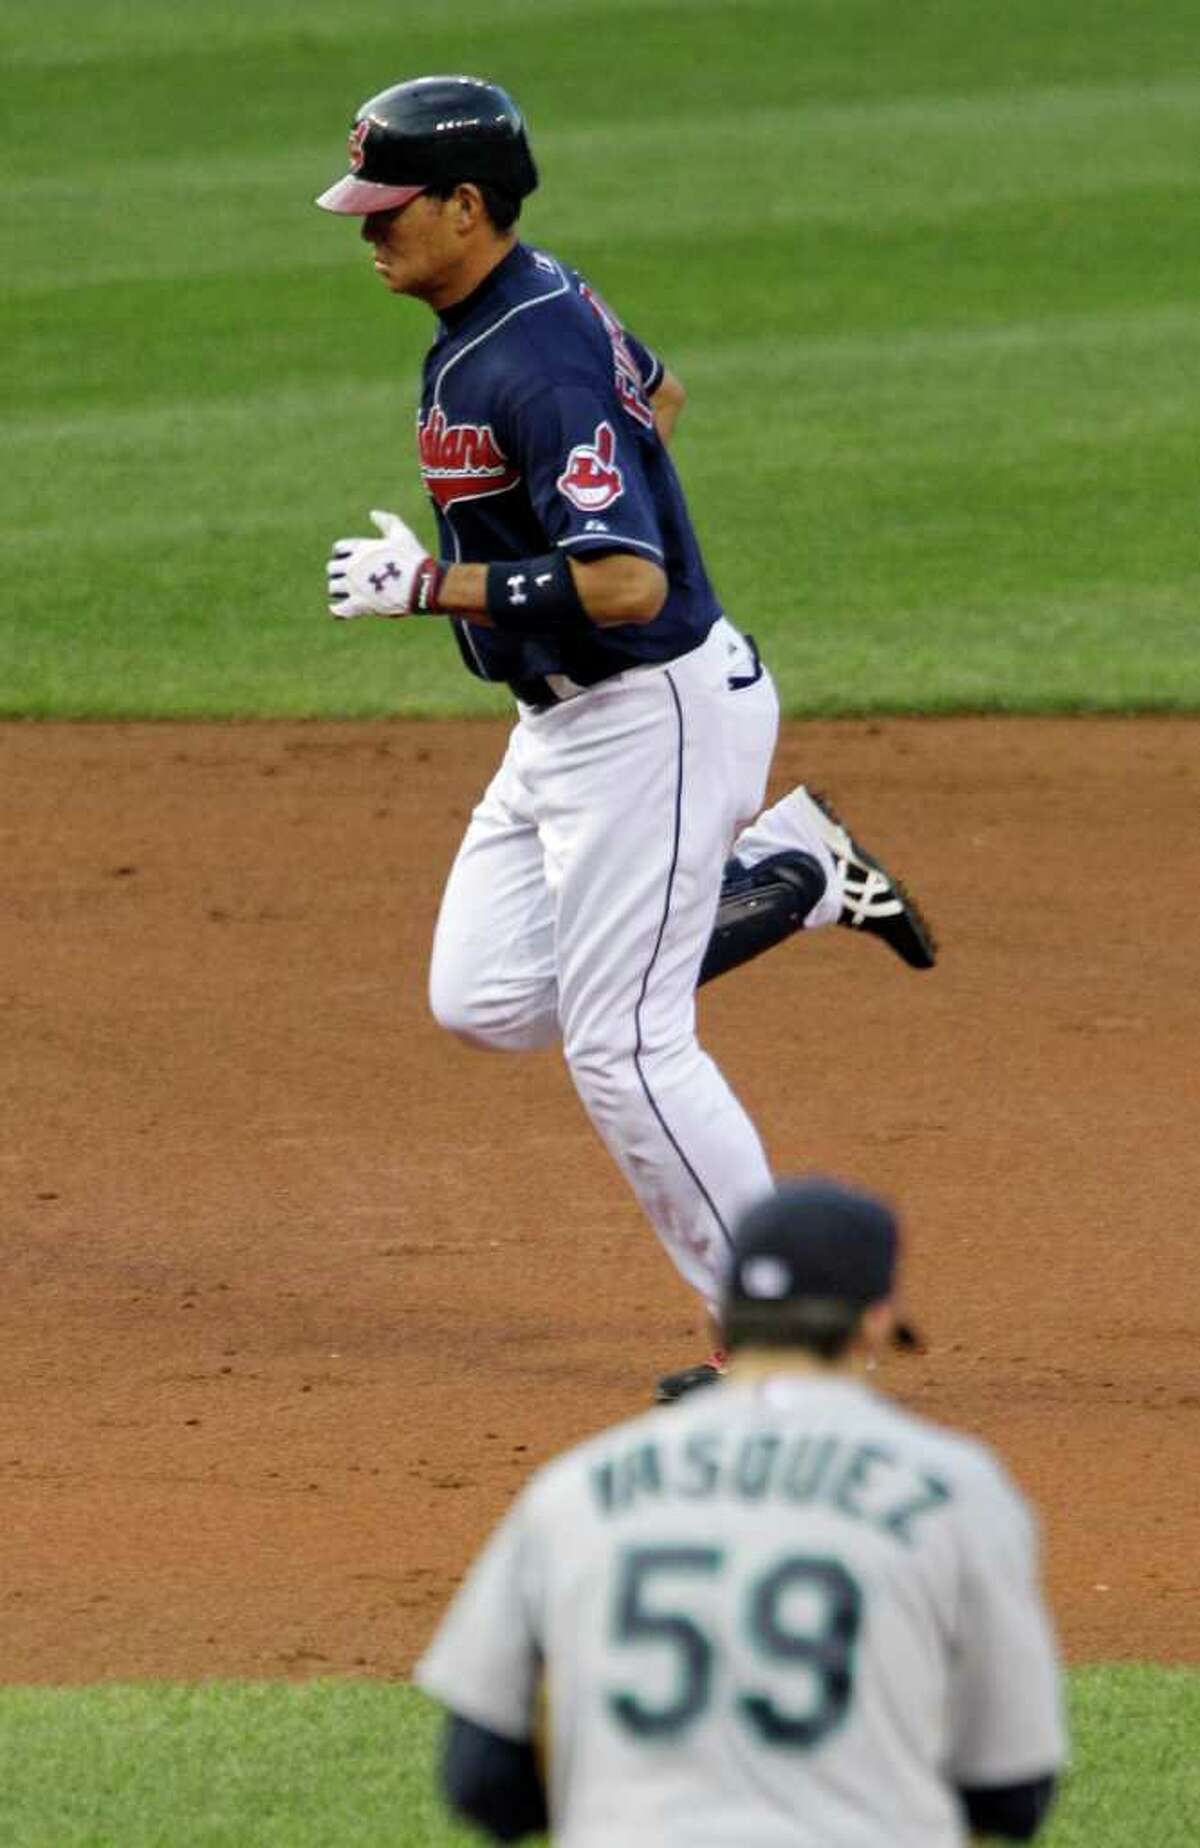 Cleveland Indians' Kosuke Fukudome, from Japan, rounds the bases after a solo home run off Seattle Mariners starting pitcher Anthony Vasquez (59) in the second inning of the second game of a baseball doubleheader Tuesday, Aug. 23, 2011, in Cleveland.